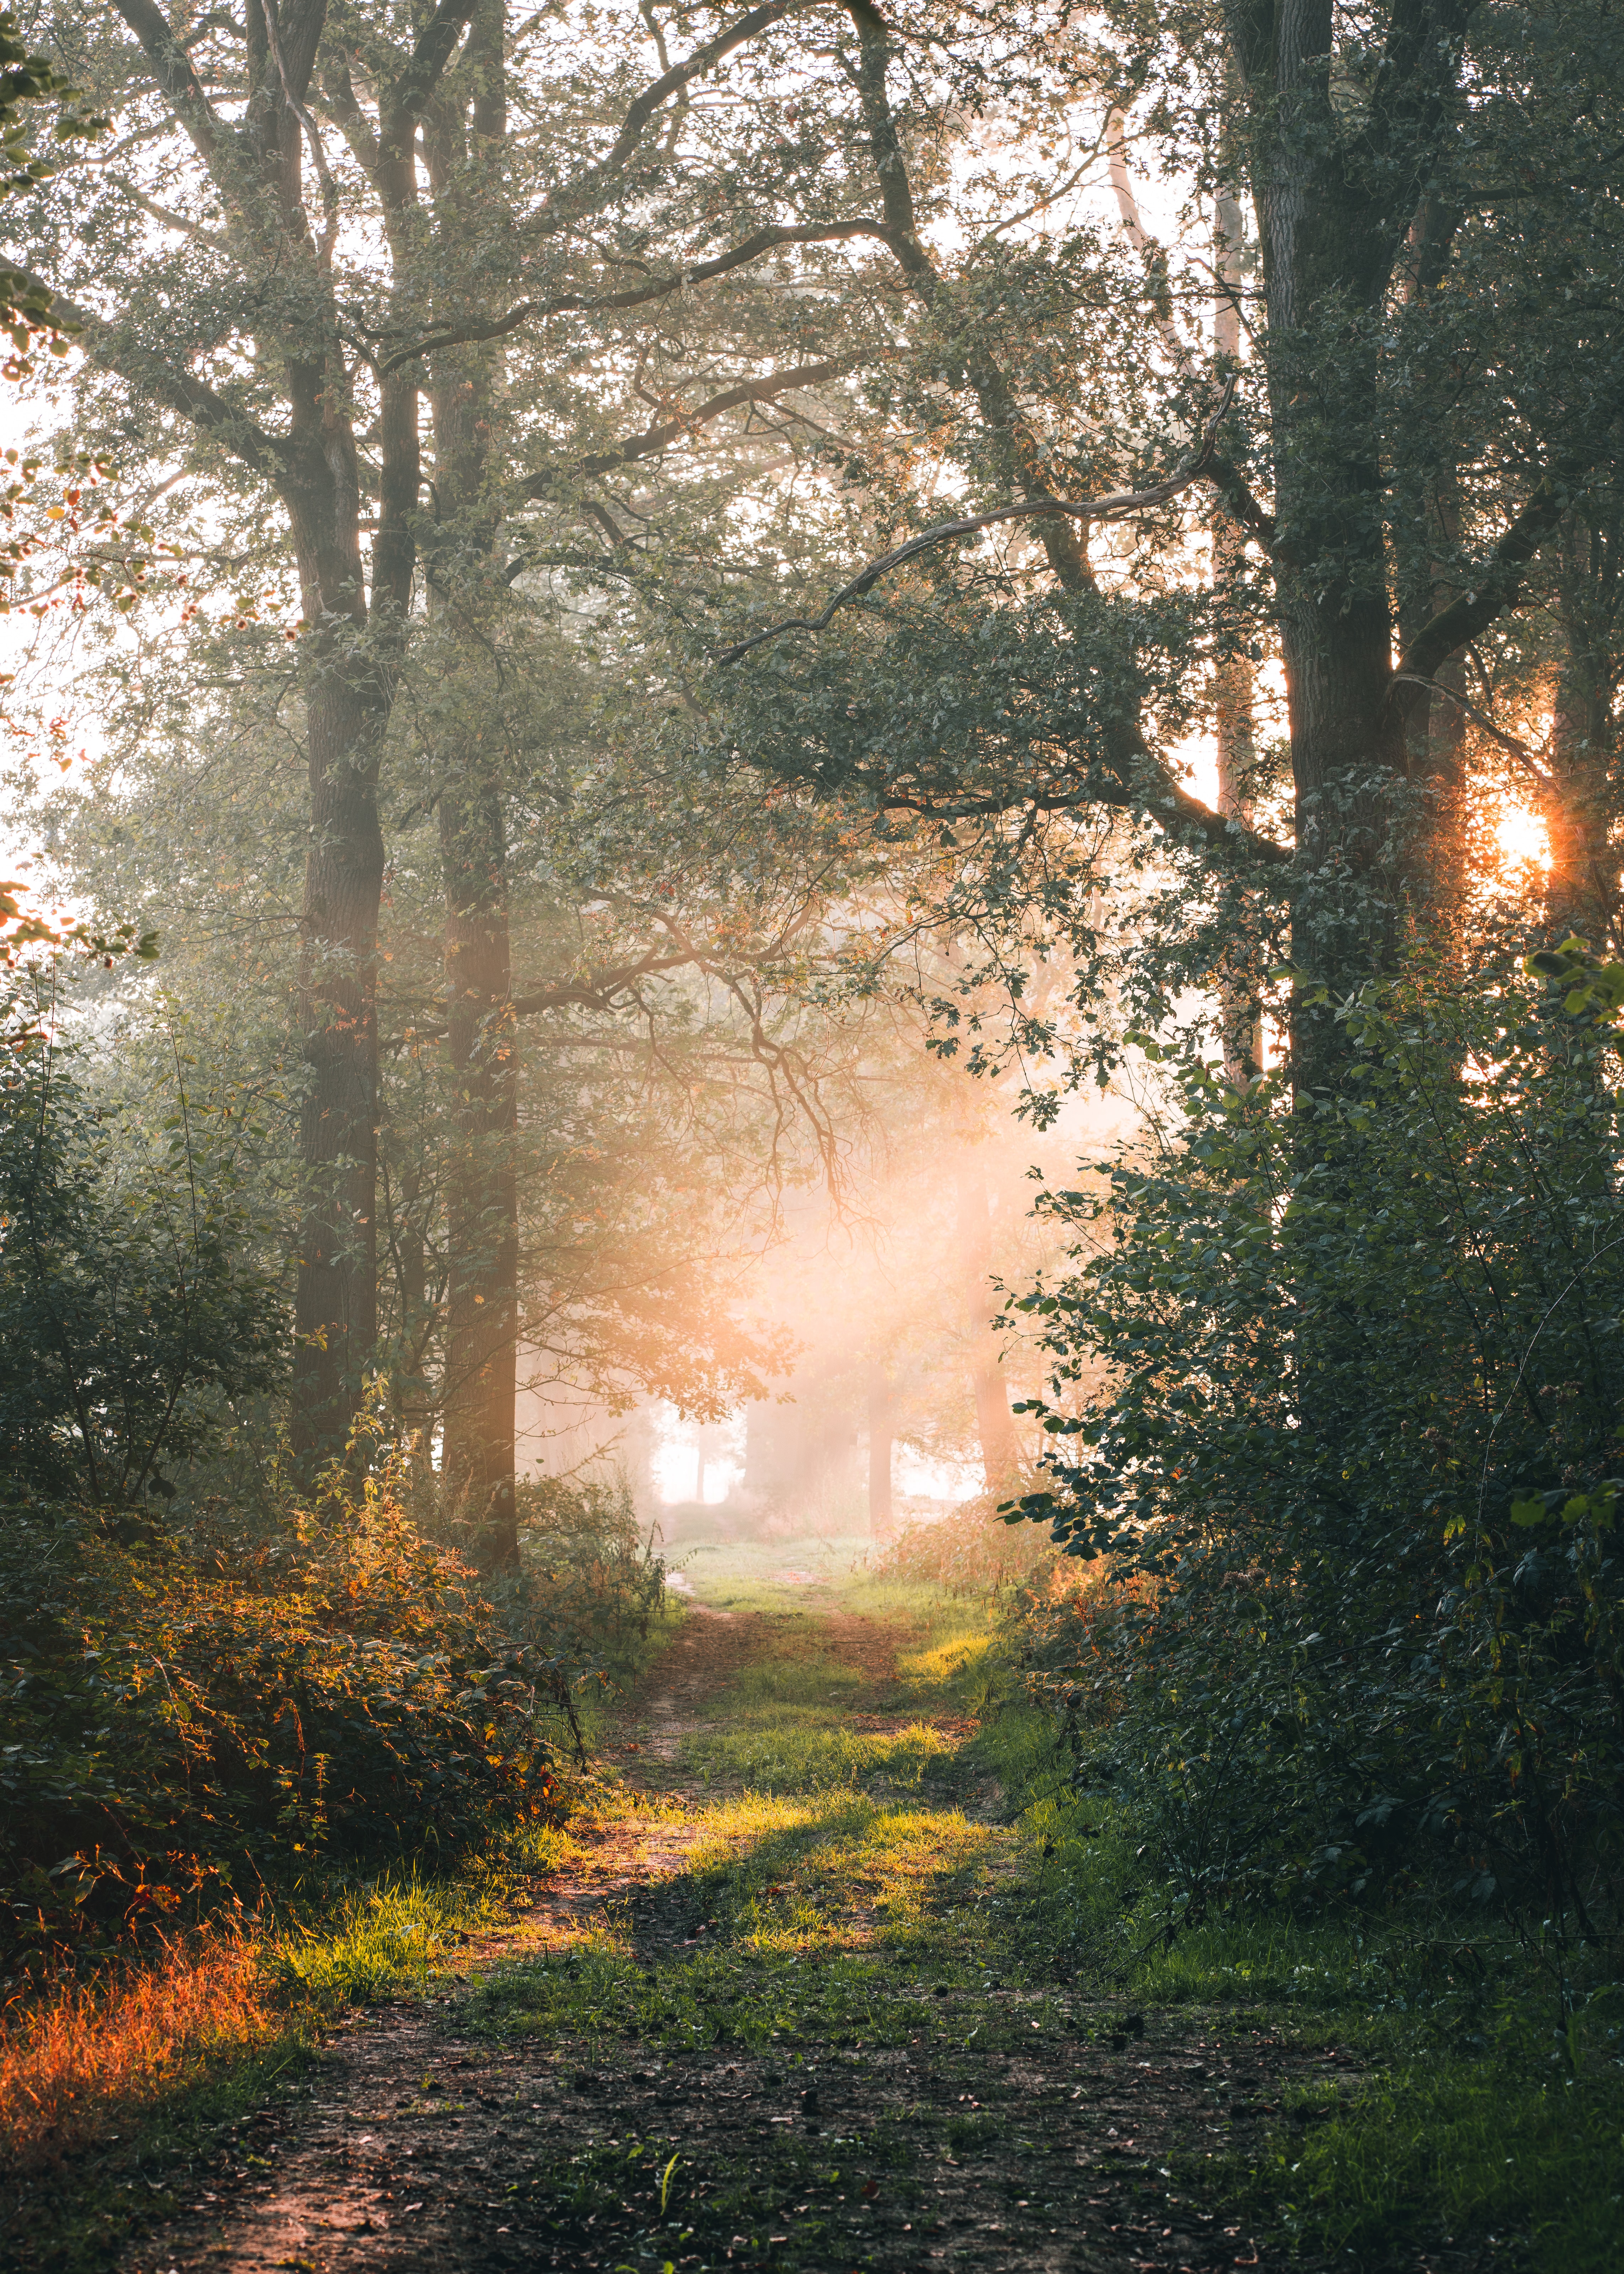 forest, nature, sun, beams, rays, branches, path Image for desktop